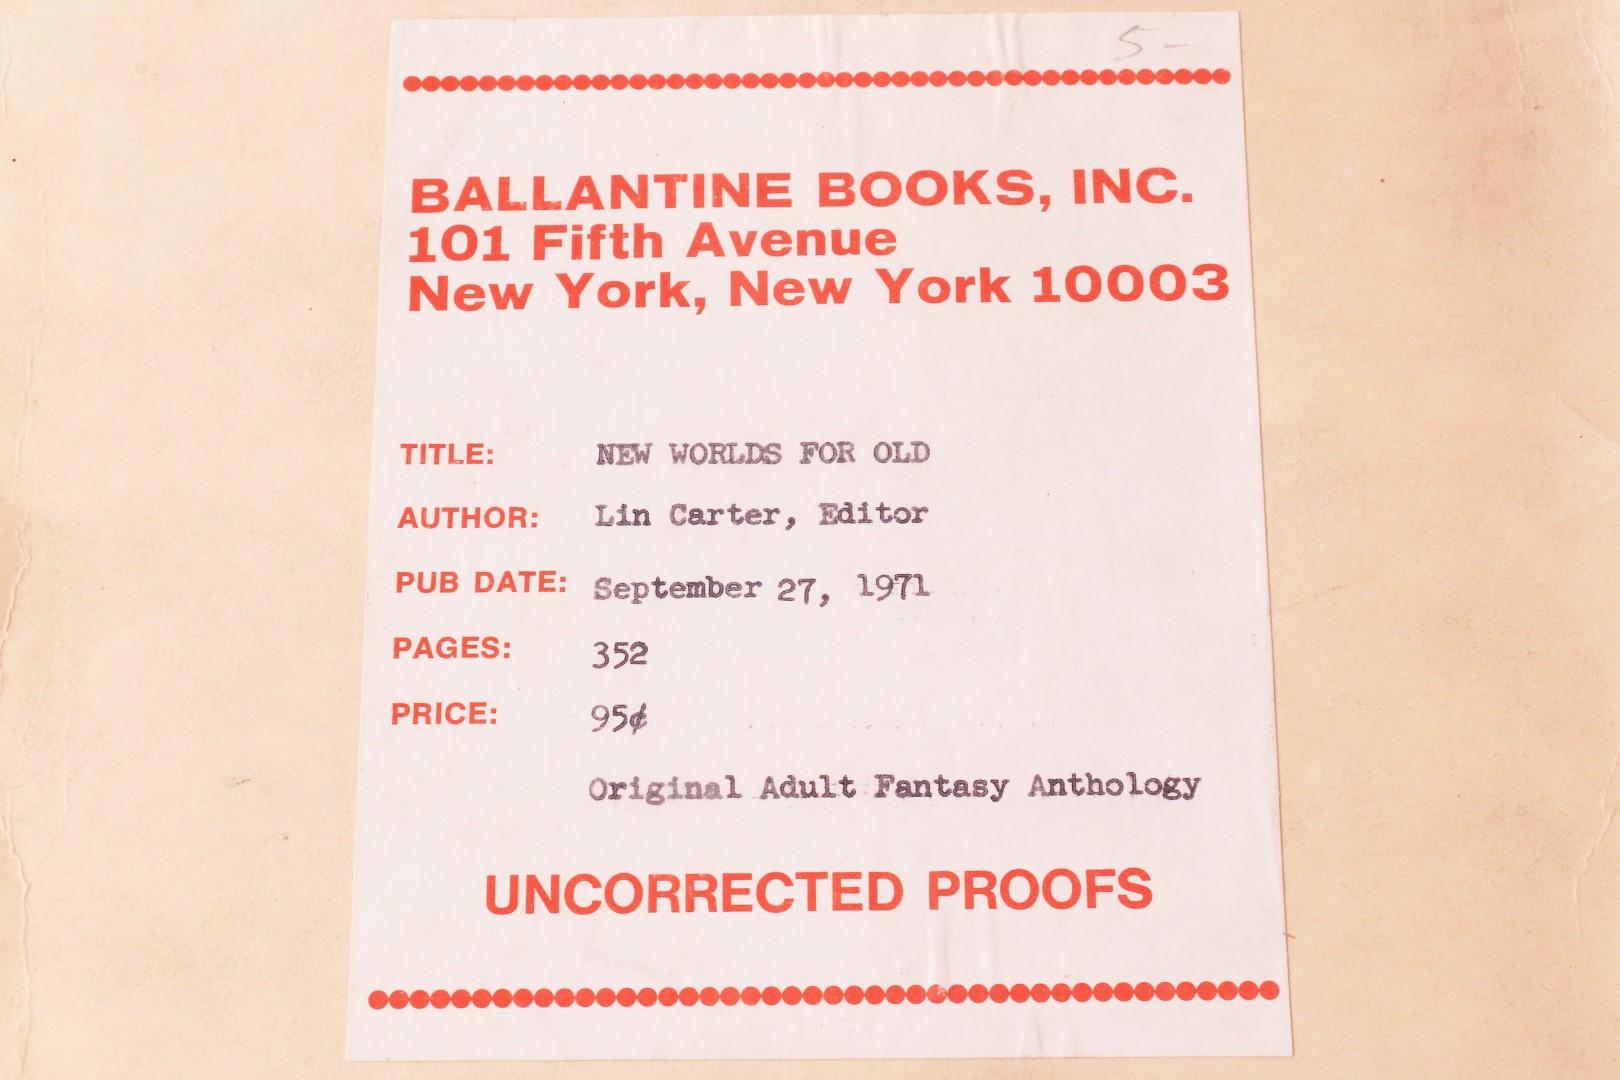 Lin Carter [ed] - New Worlds for Old - Ballantine Books, 1971, Proof.